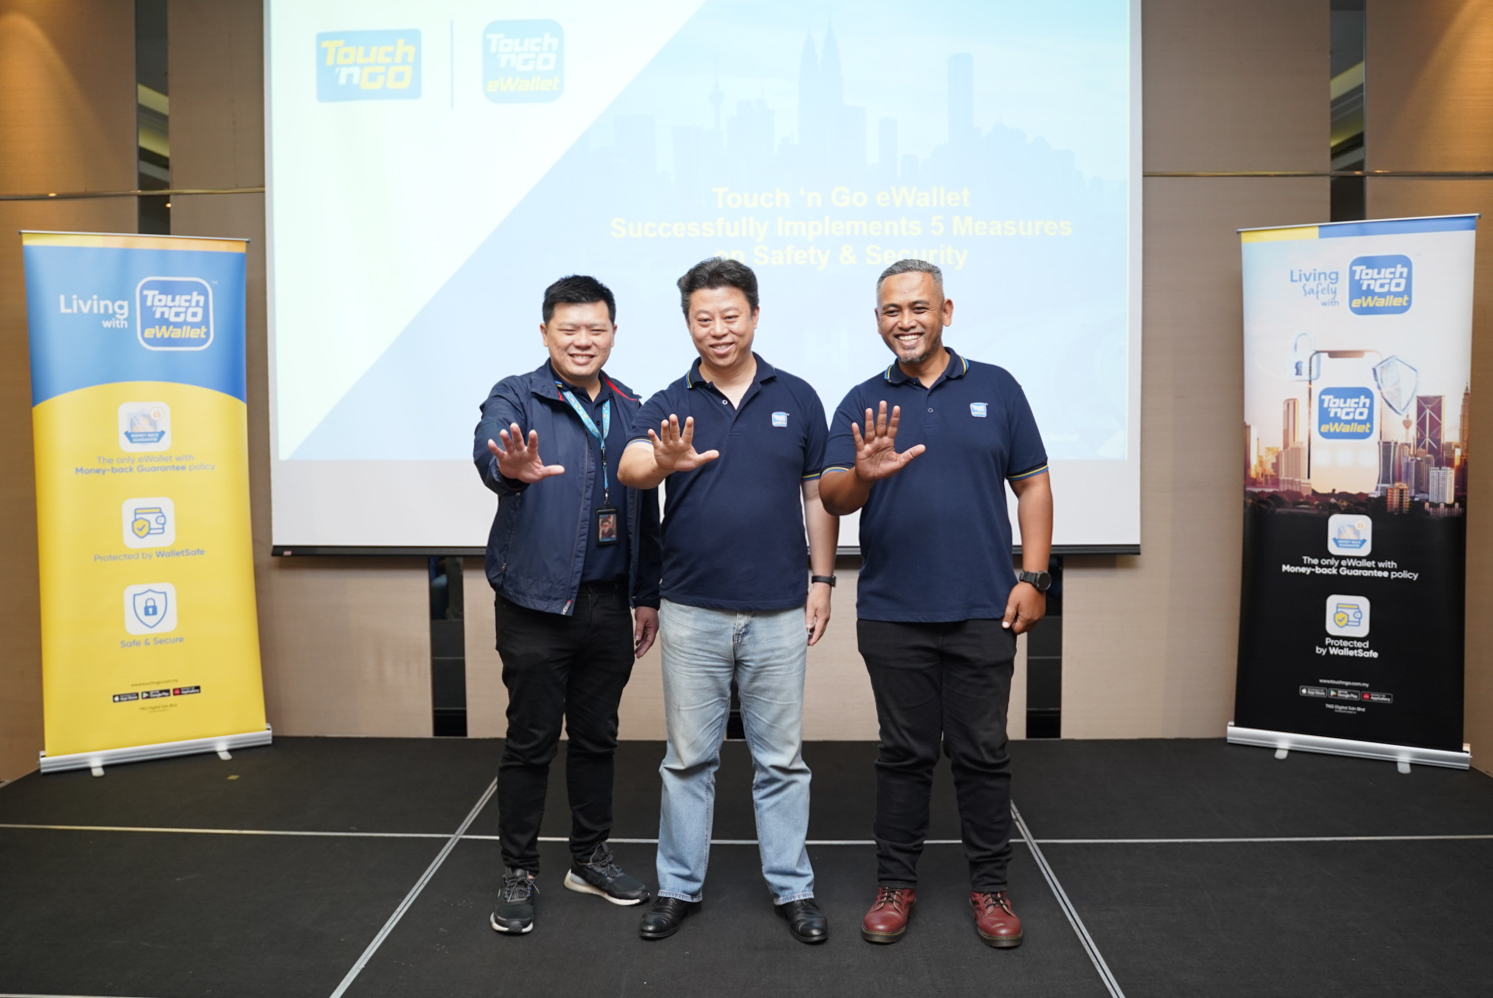 Alan Ni, CEO, TNG Digital Sdn Bhd (centre) with Mohd Herman Sarbini, COO of TNG Digital Sdn Bhd (right) and Foo Yeong Jin, director of Data & Analytics, TNG Digital Sdn Bhd at the media briefing on the implementation of the 5 safety and security measures for Touch ‘n Go eWallet.